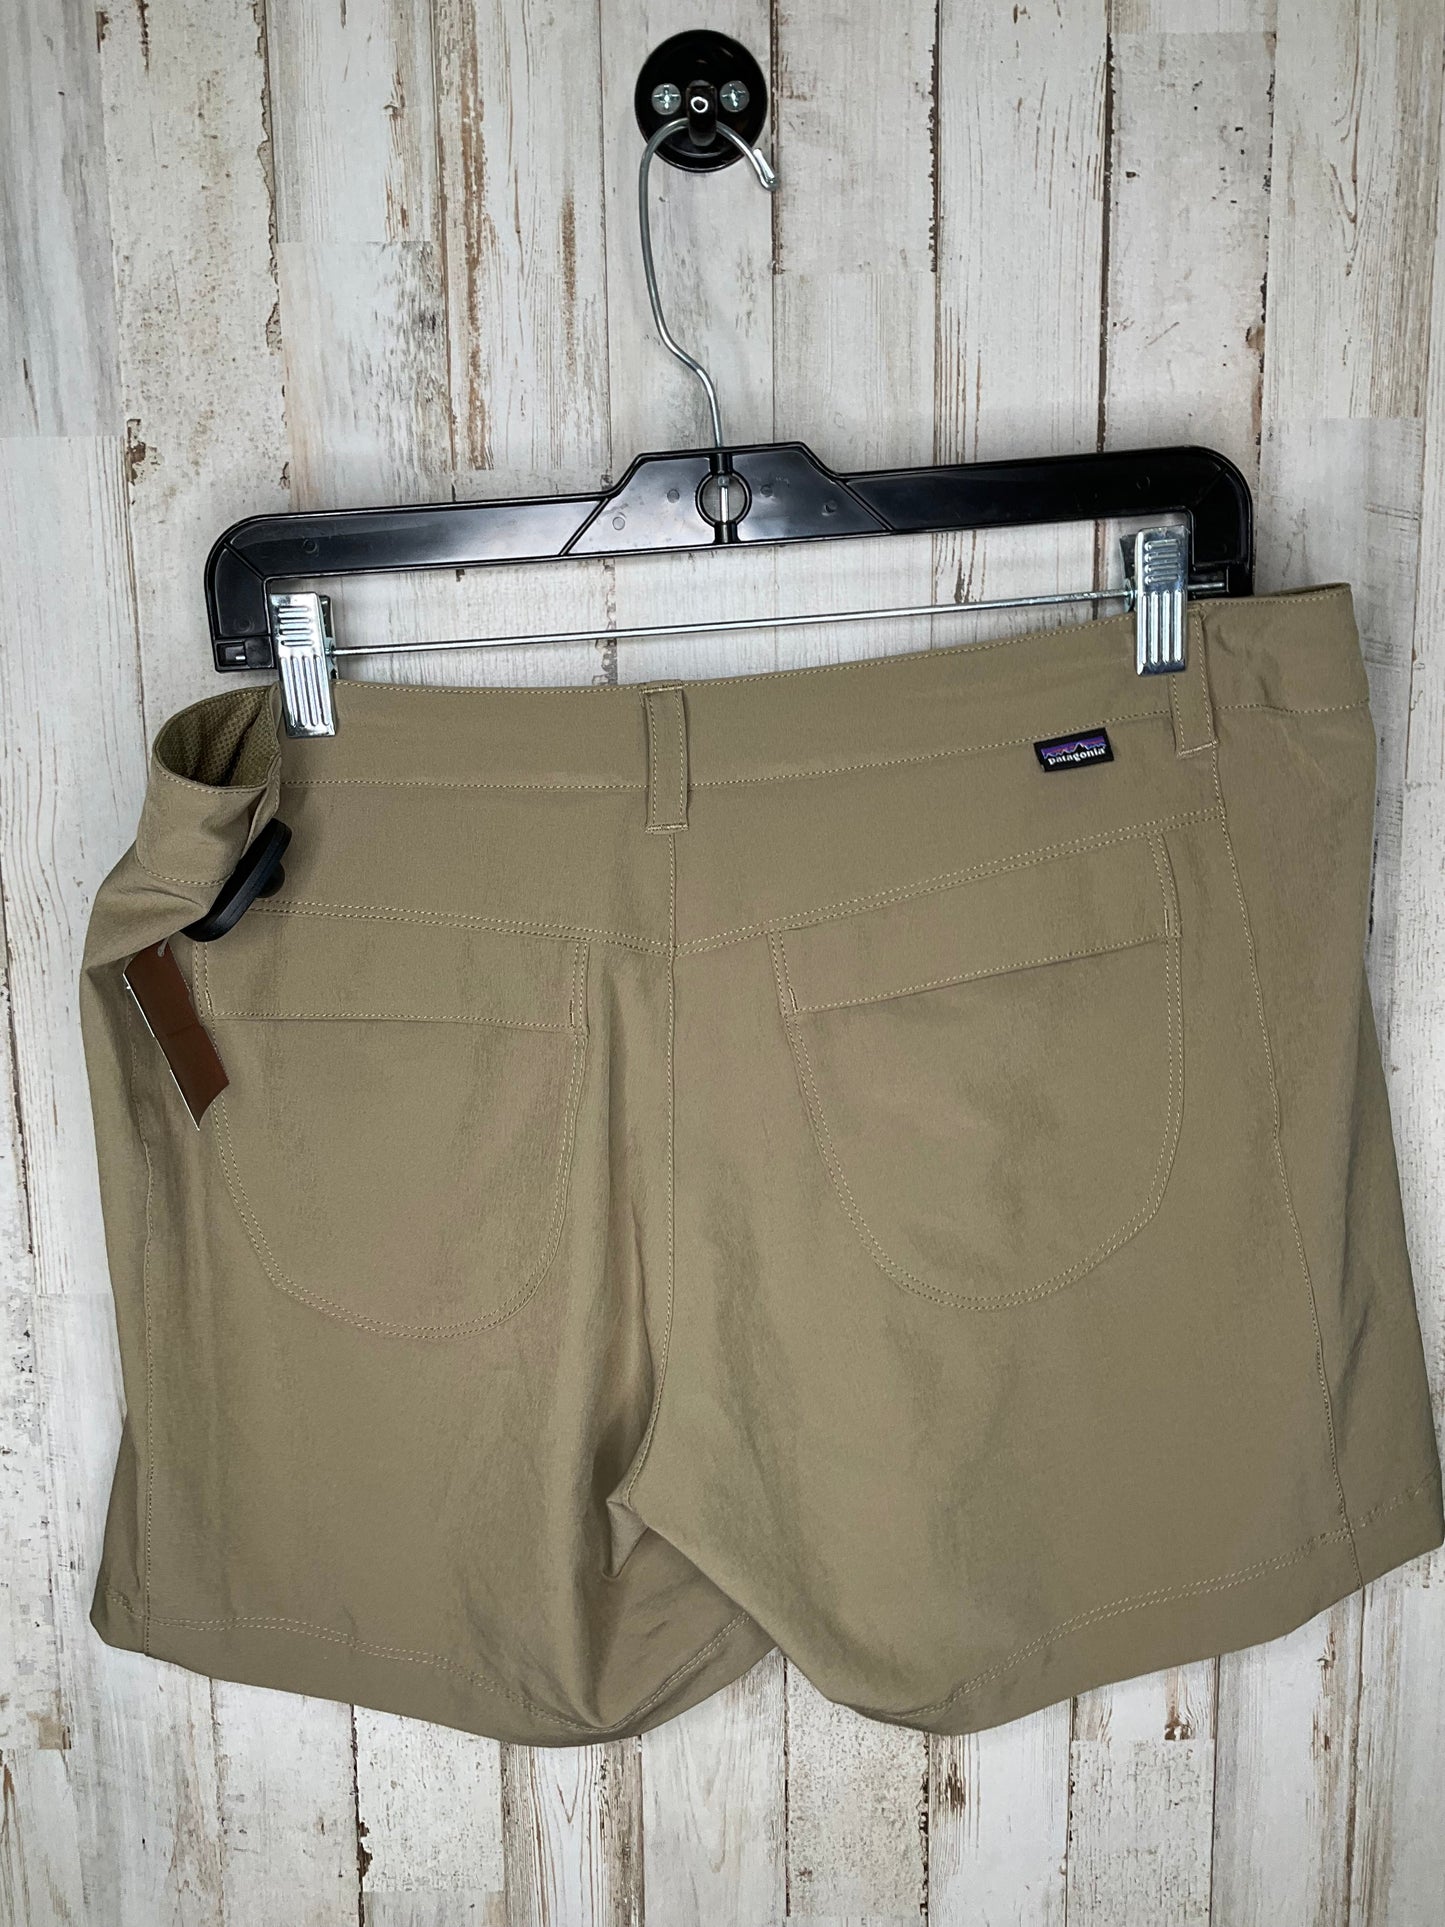 Shorts By Patagonia  Size: 12